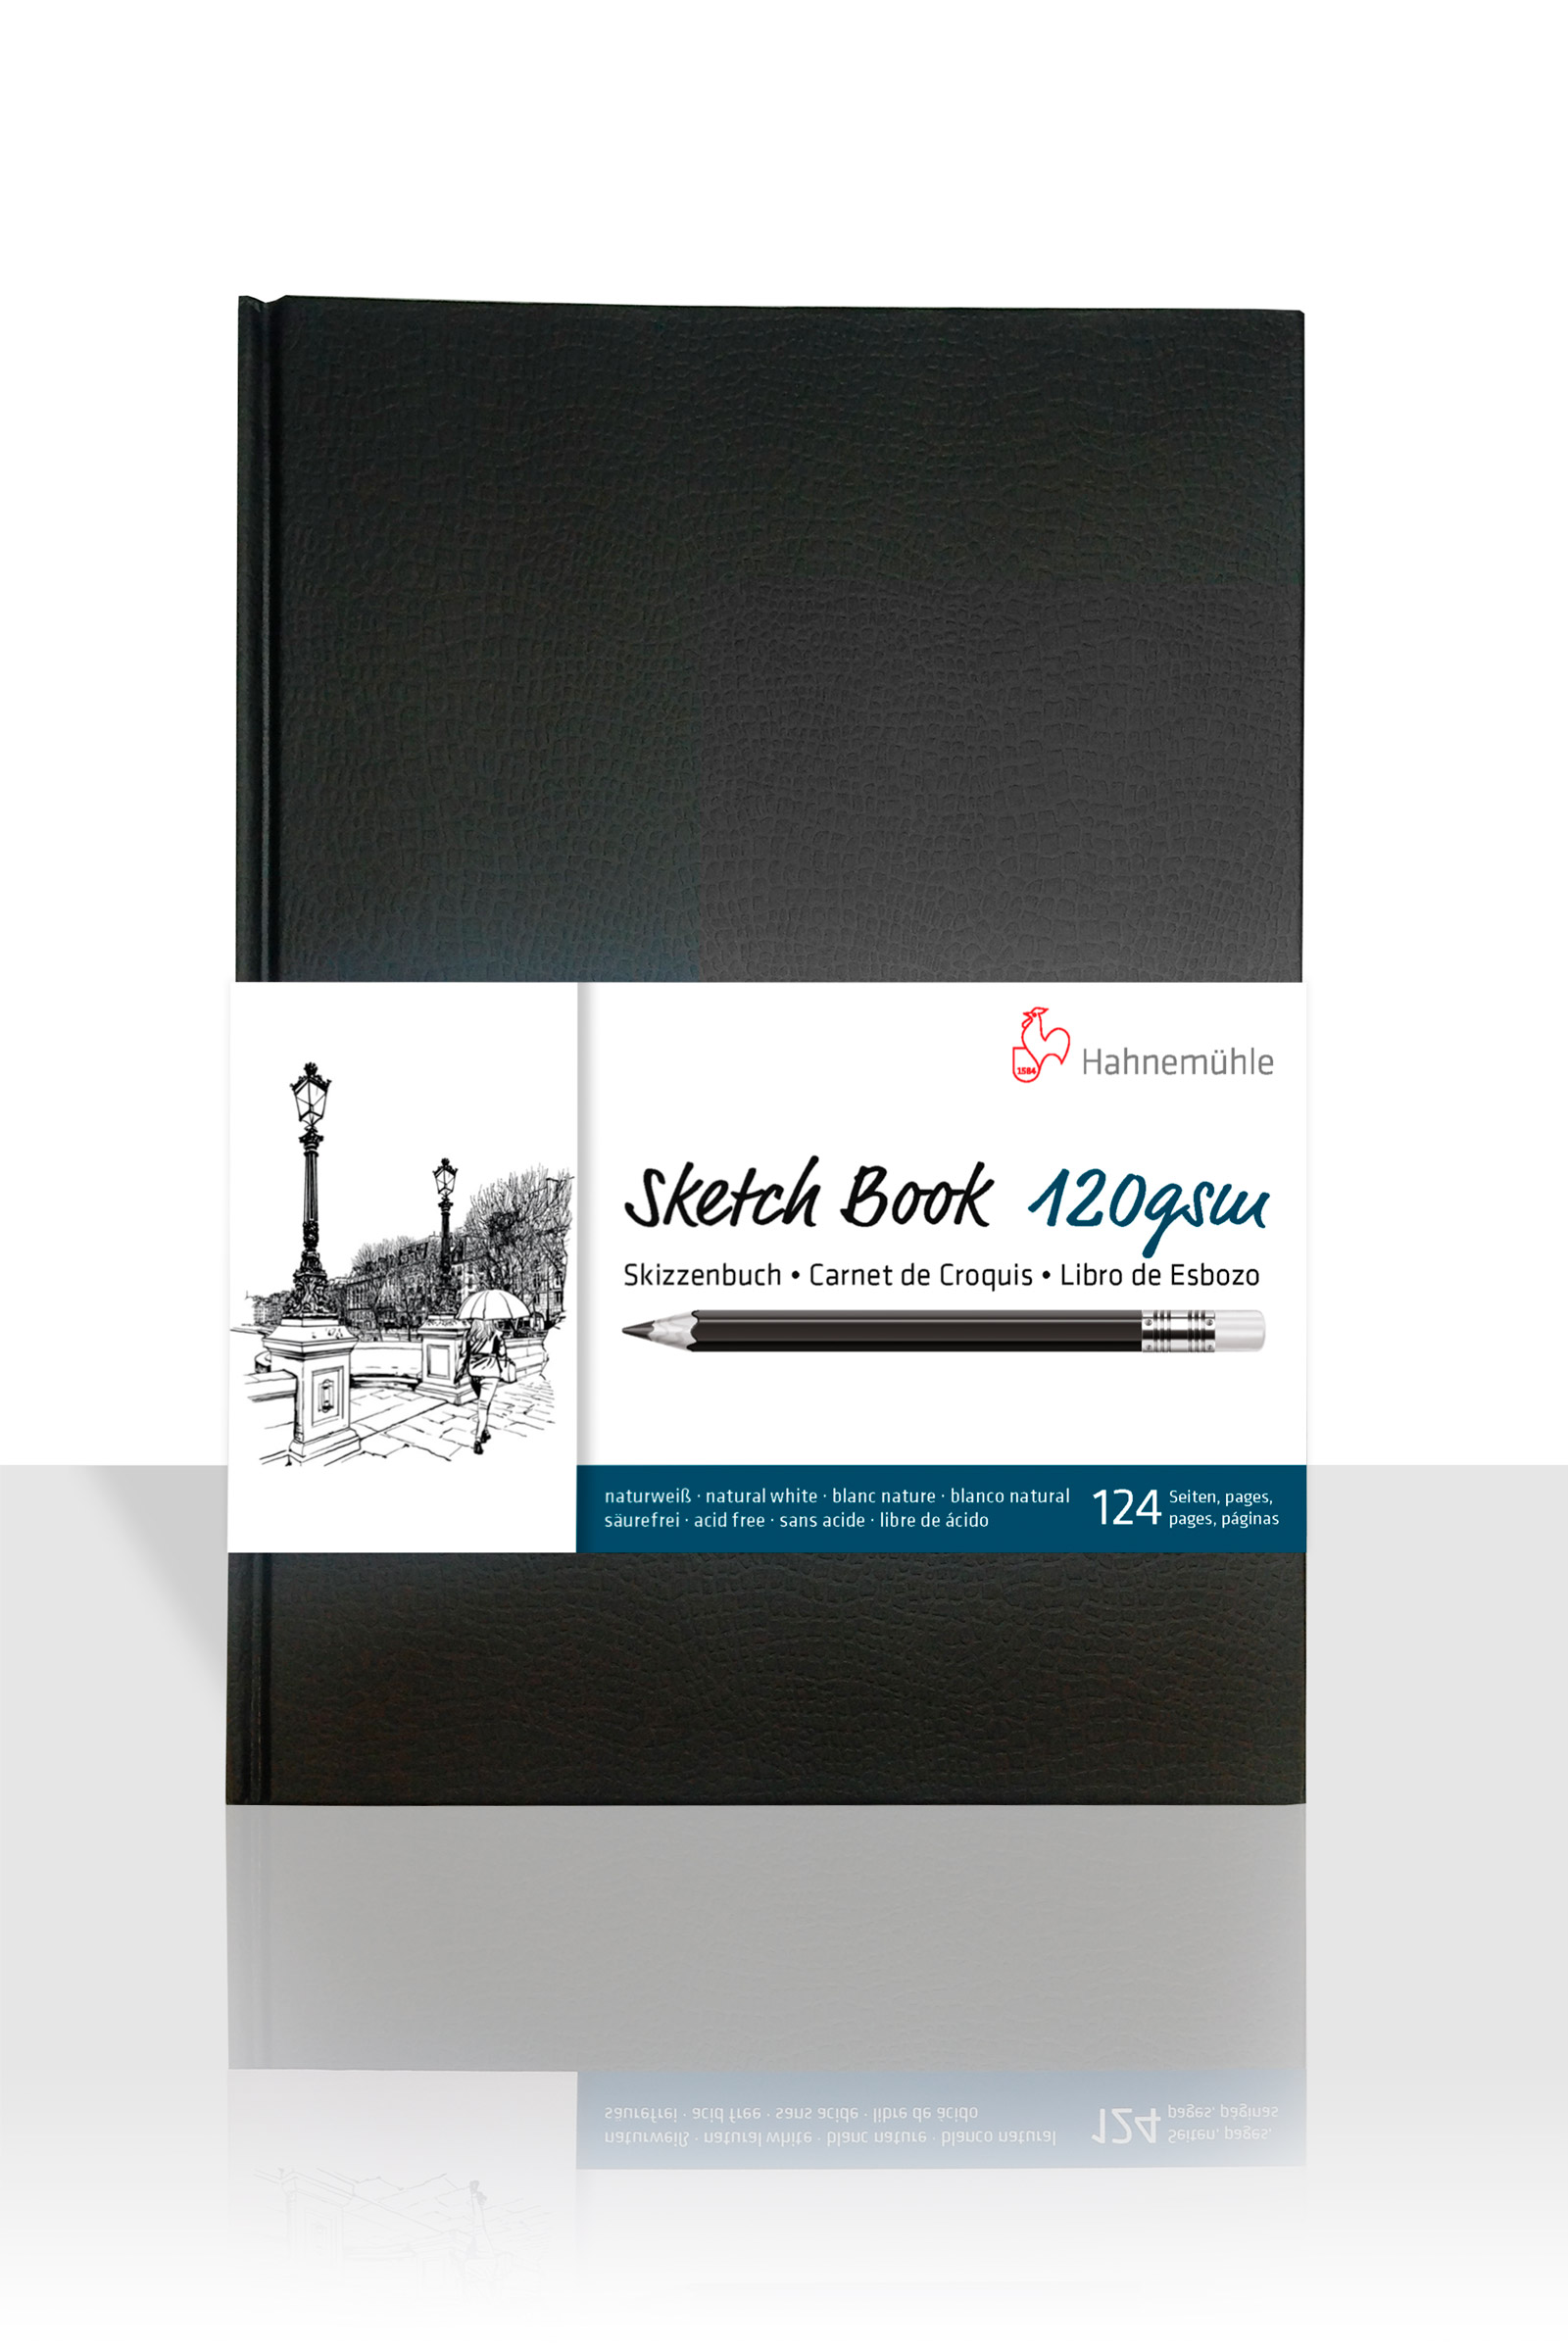 Hahnemuhle Sketch Book (Black Cover, A3, 64 Sheets) 10628354 B&H